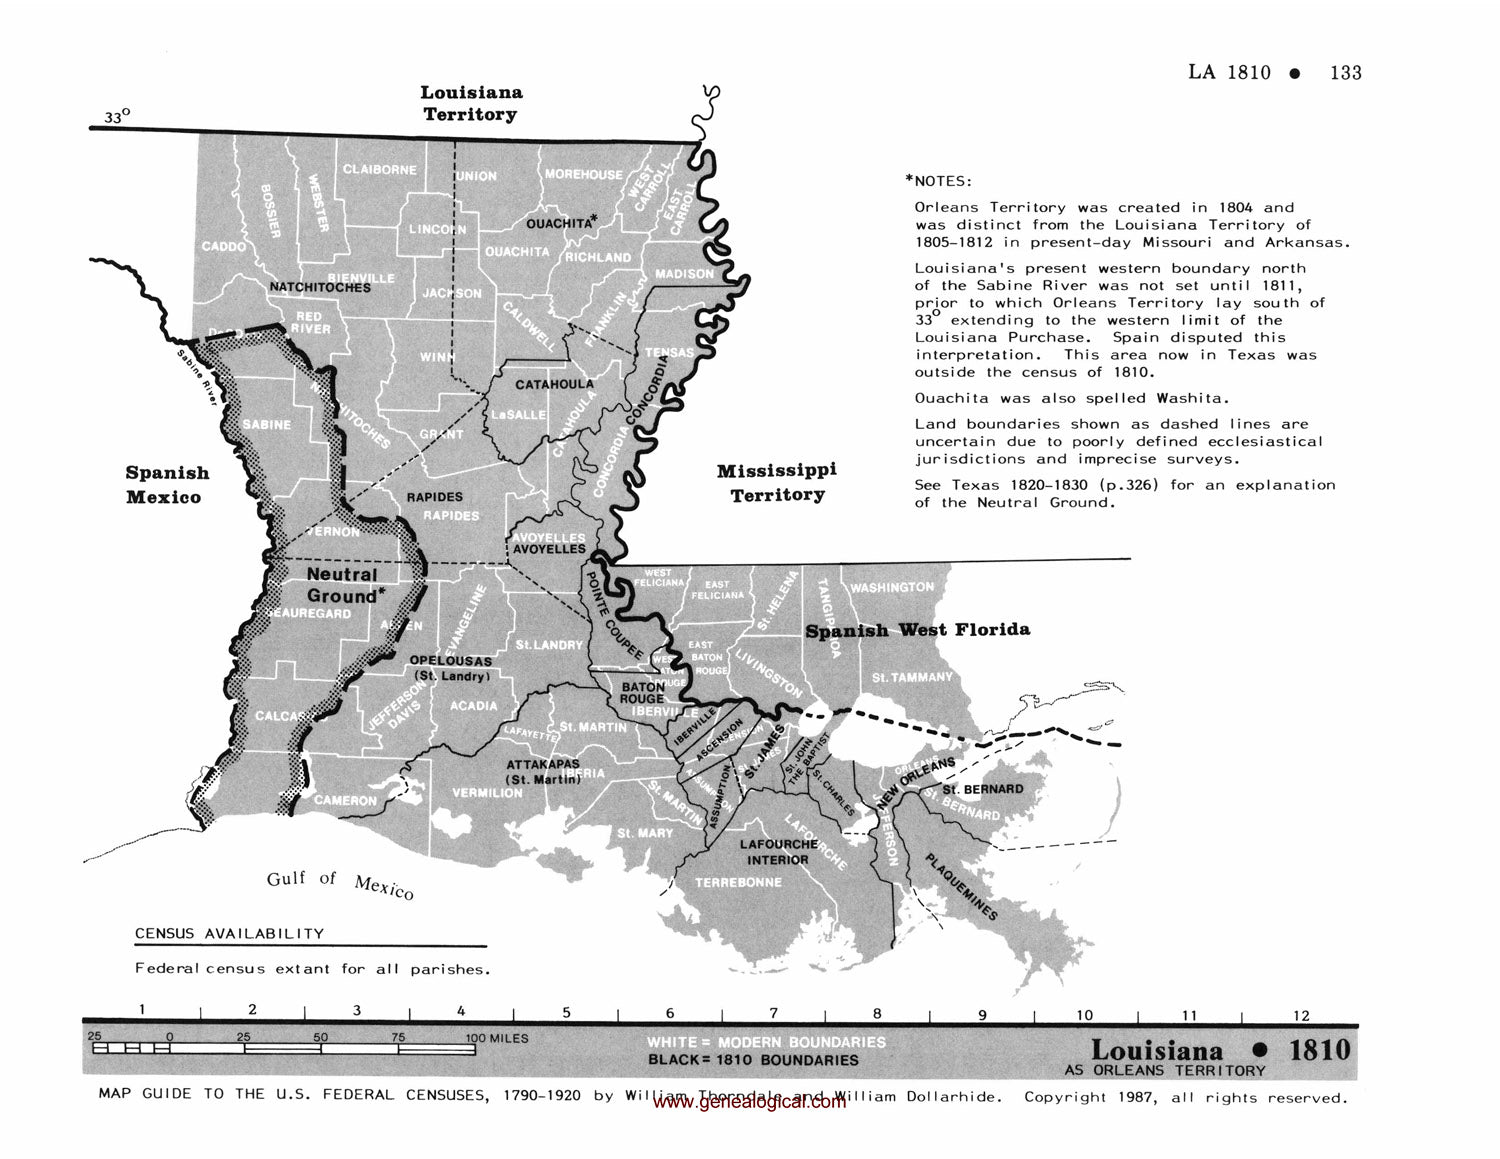 Map Guide To The U.S. Federal Censuses, Louisiana 1810 -1920 Map Packet